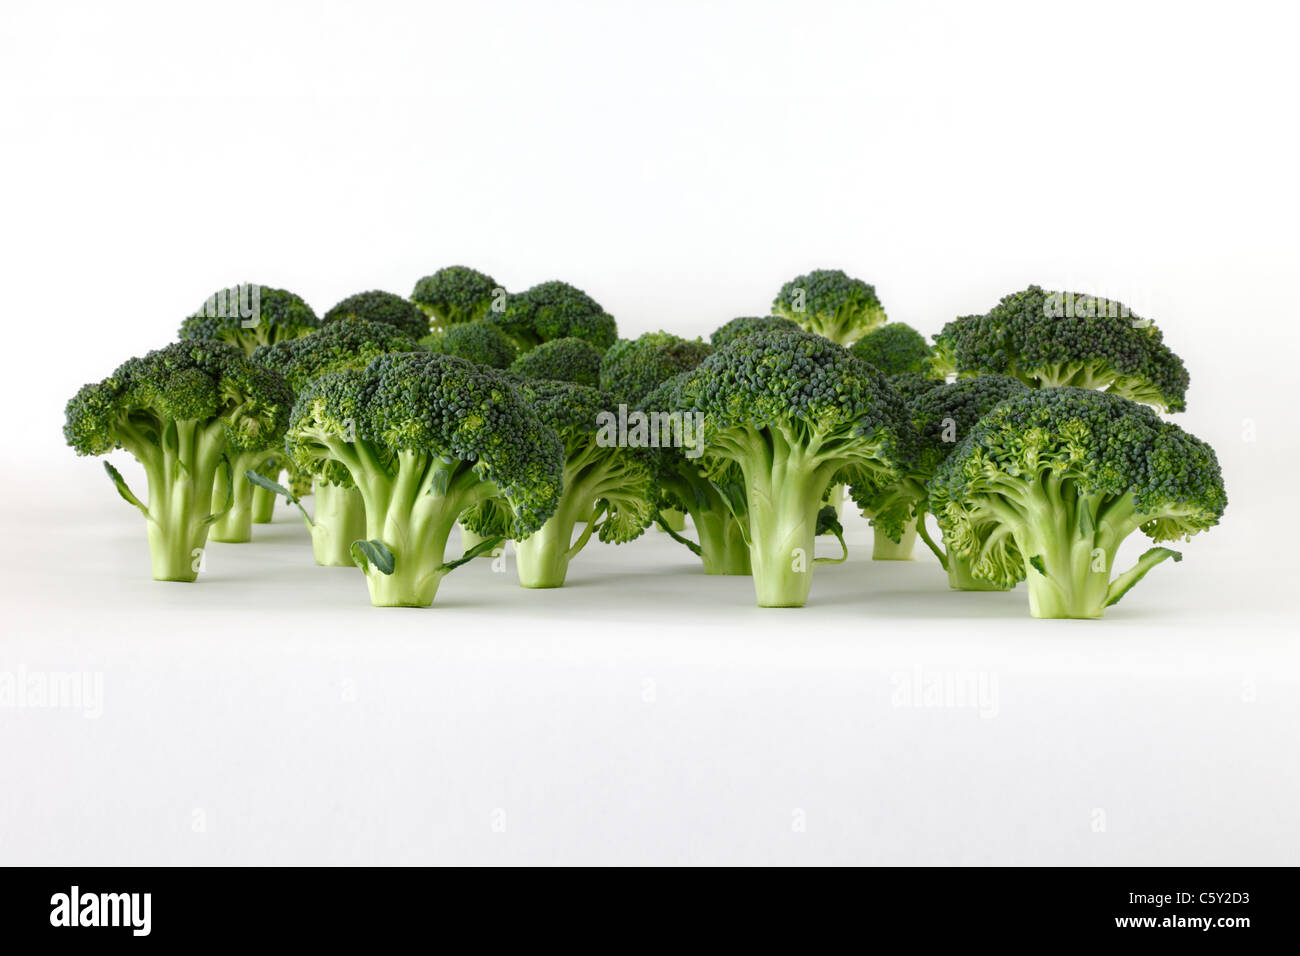 A Broccoli 'forest' Stock Photo